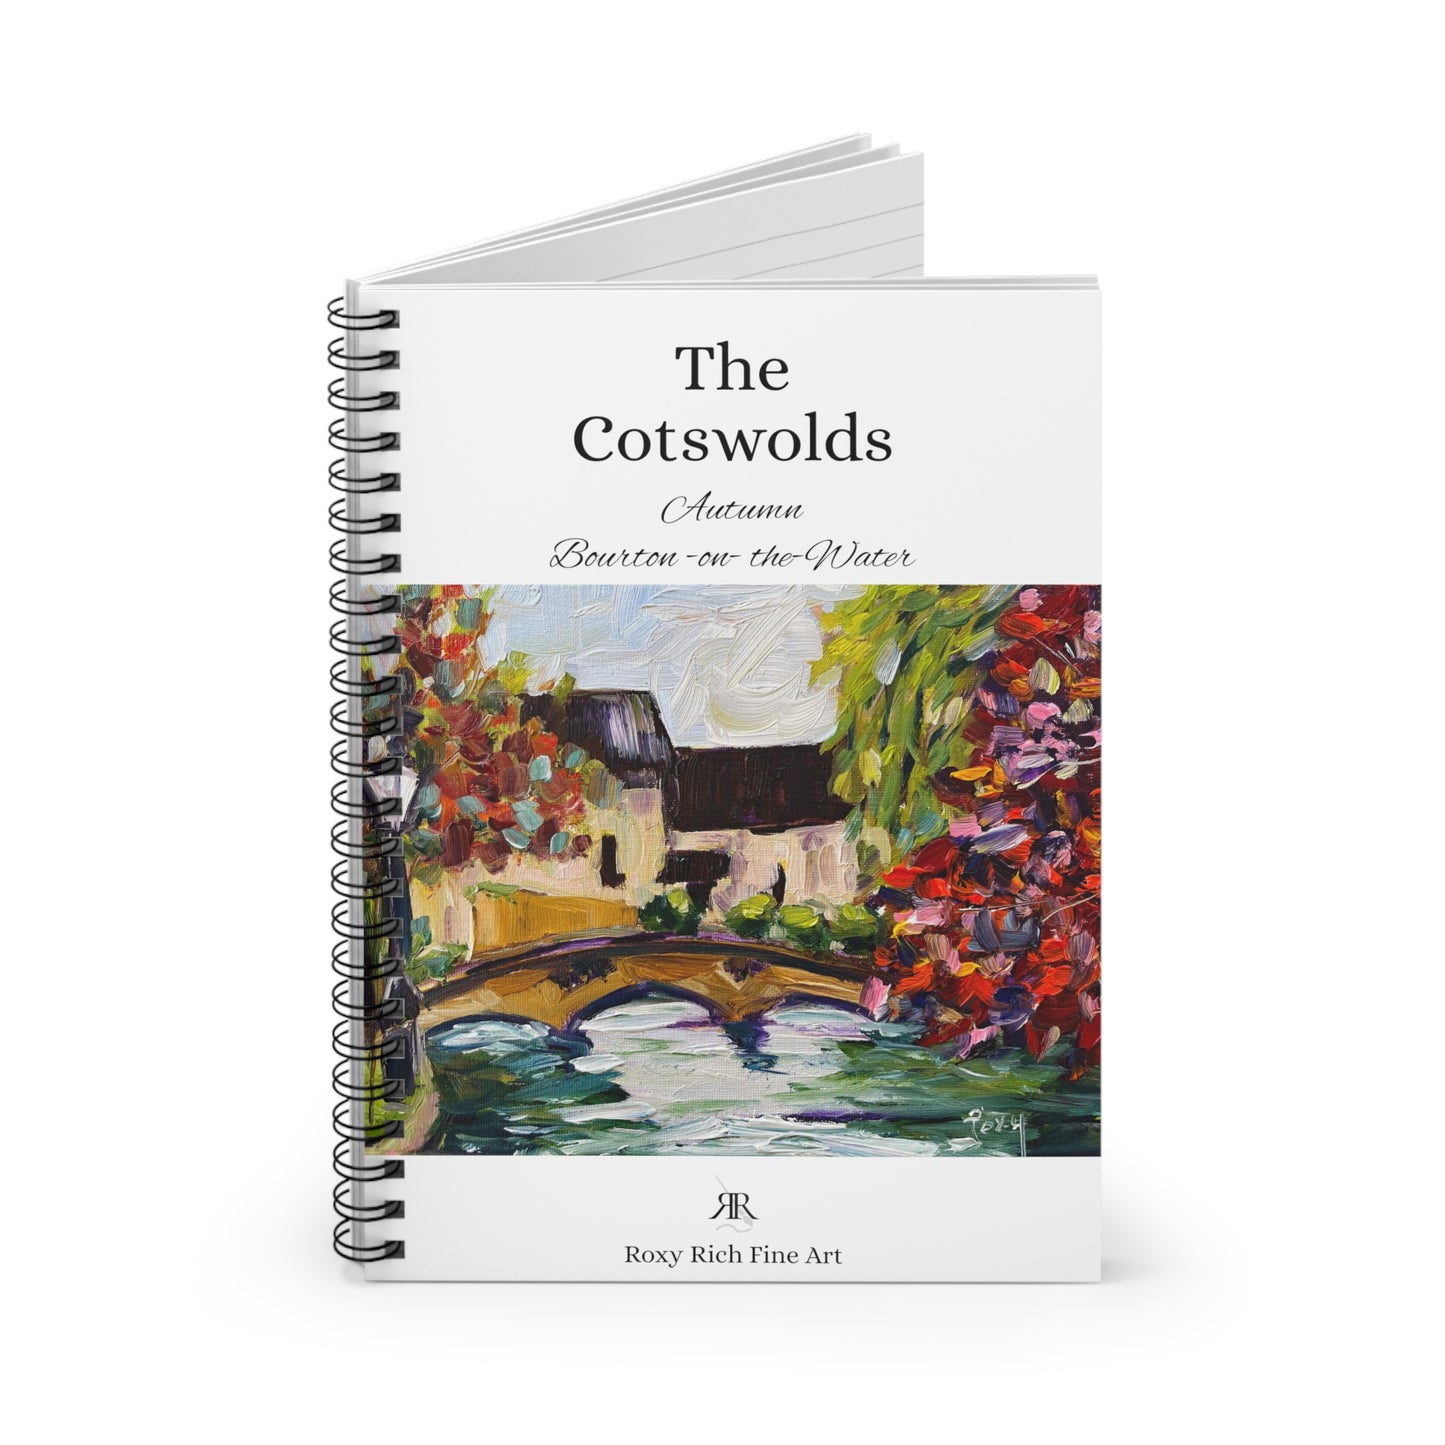 Otoño en Bourton on the Water "The Cotswolds" Cuaderno de espiral